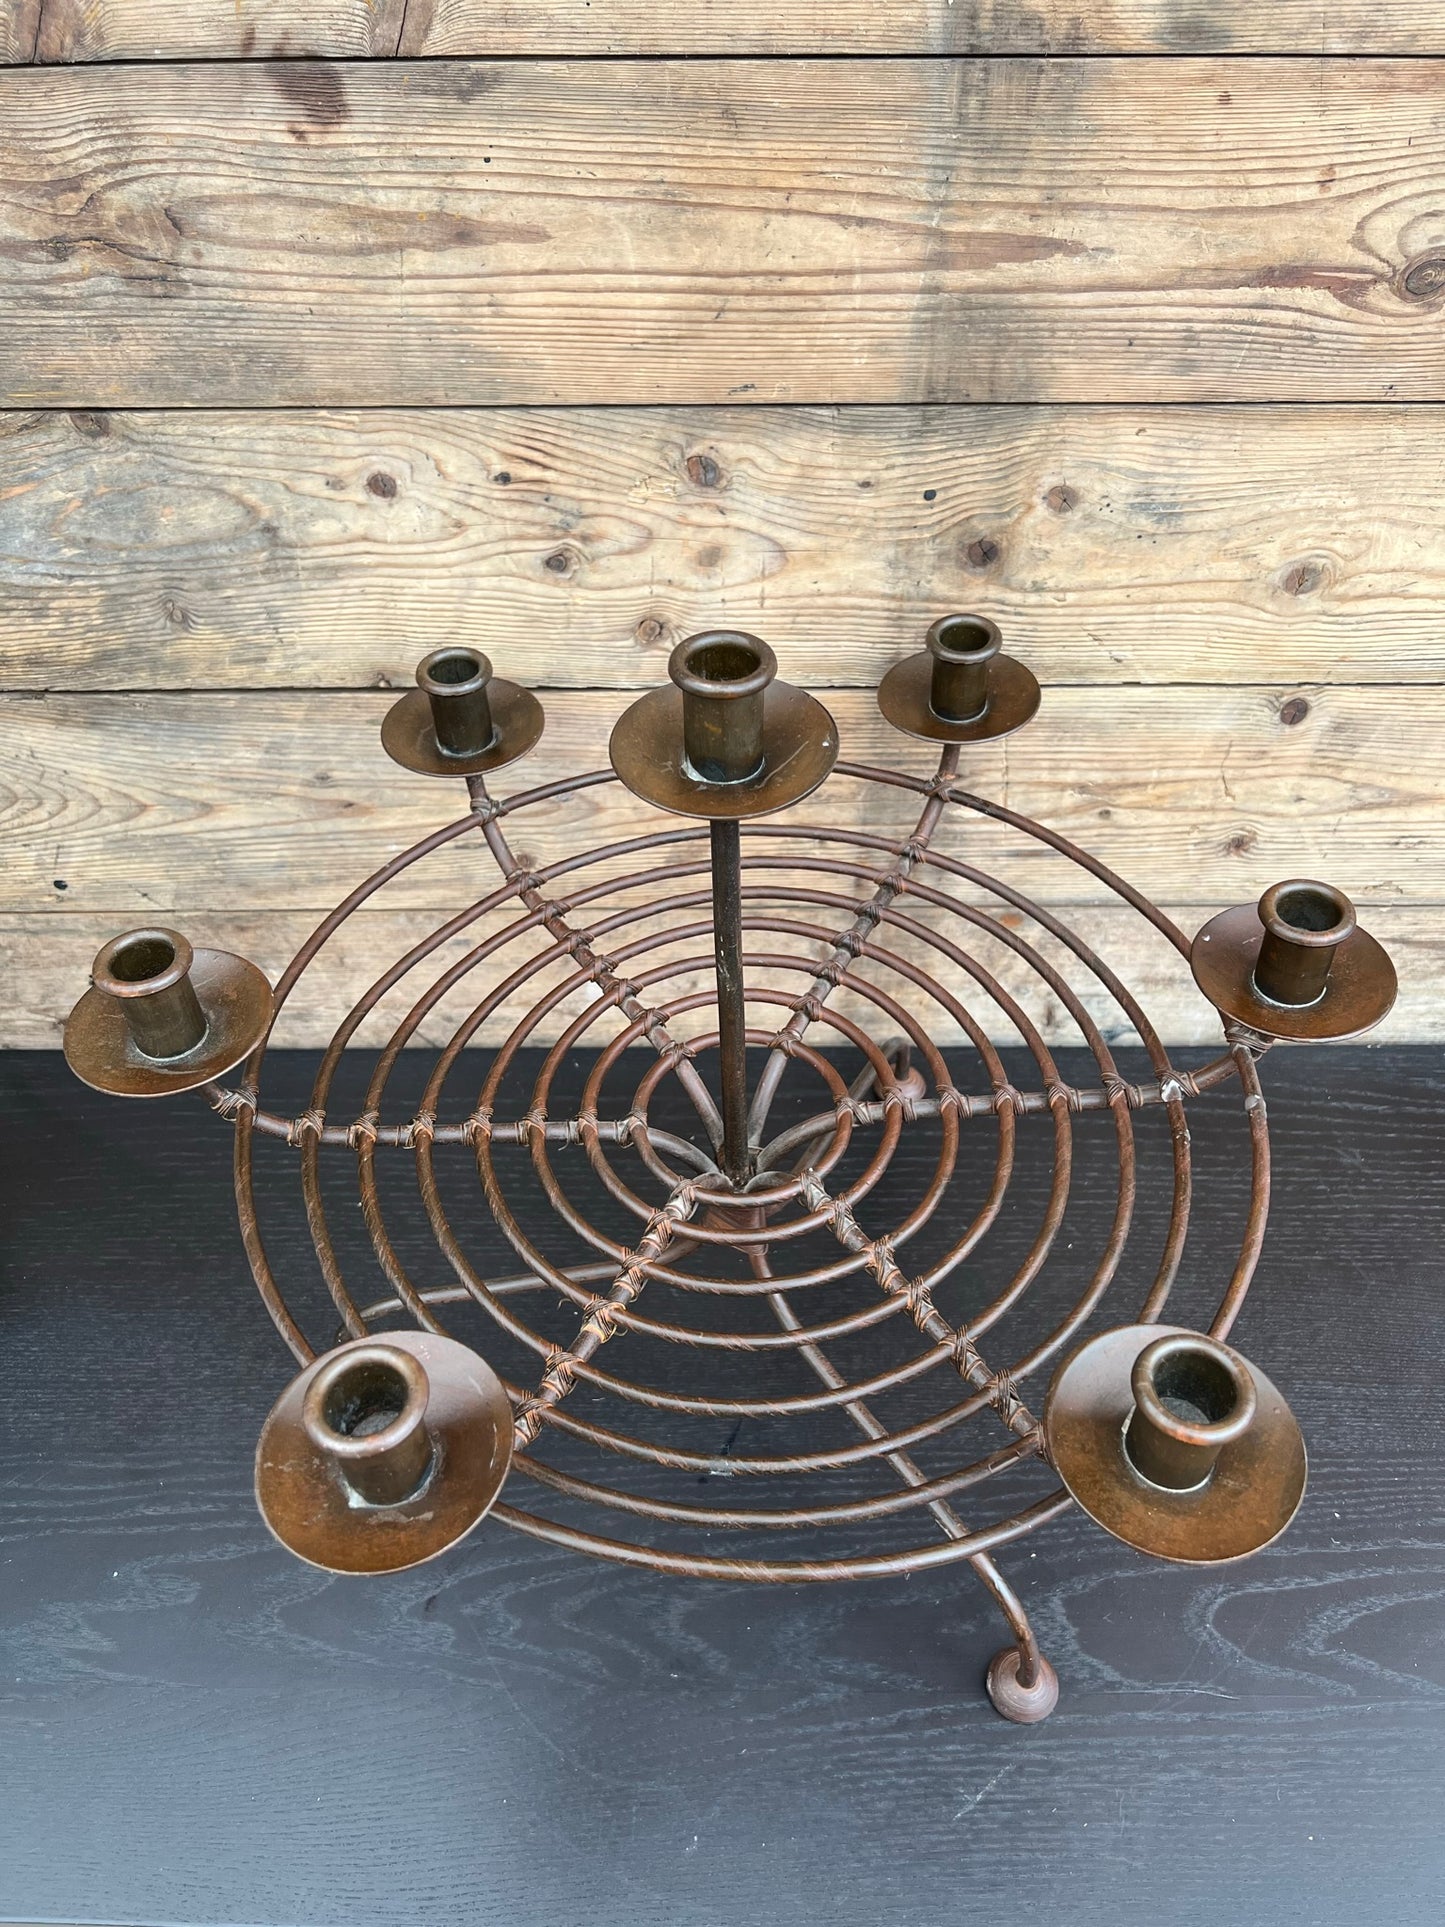 Rustic Candle Stick Holder Circular Metal Candle Arbour Stand Steampunk Vintage Decor